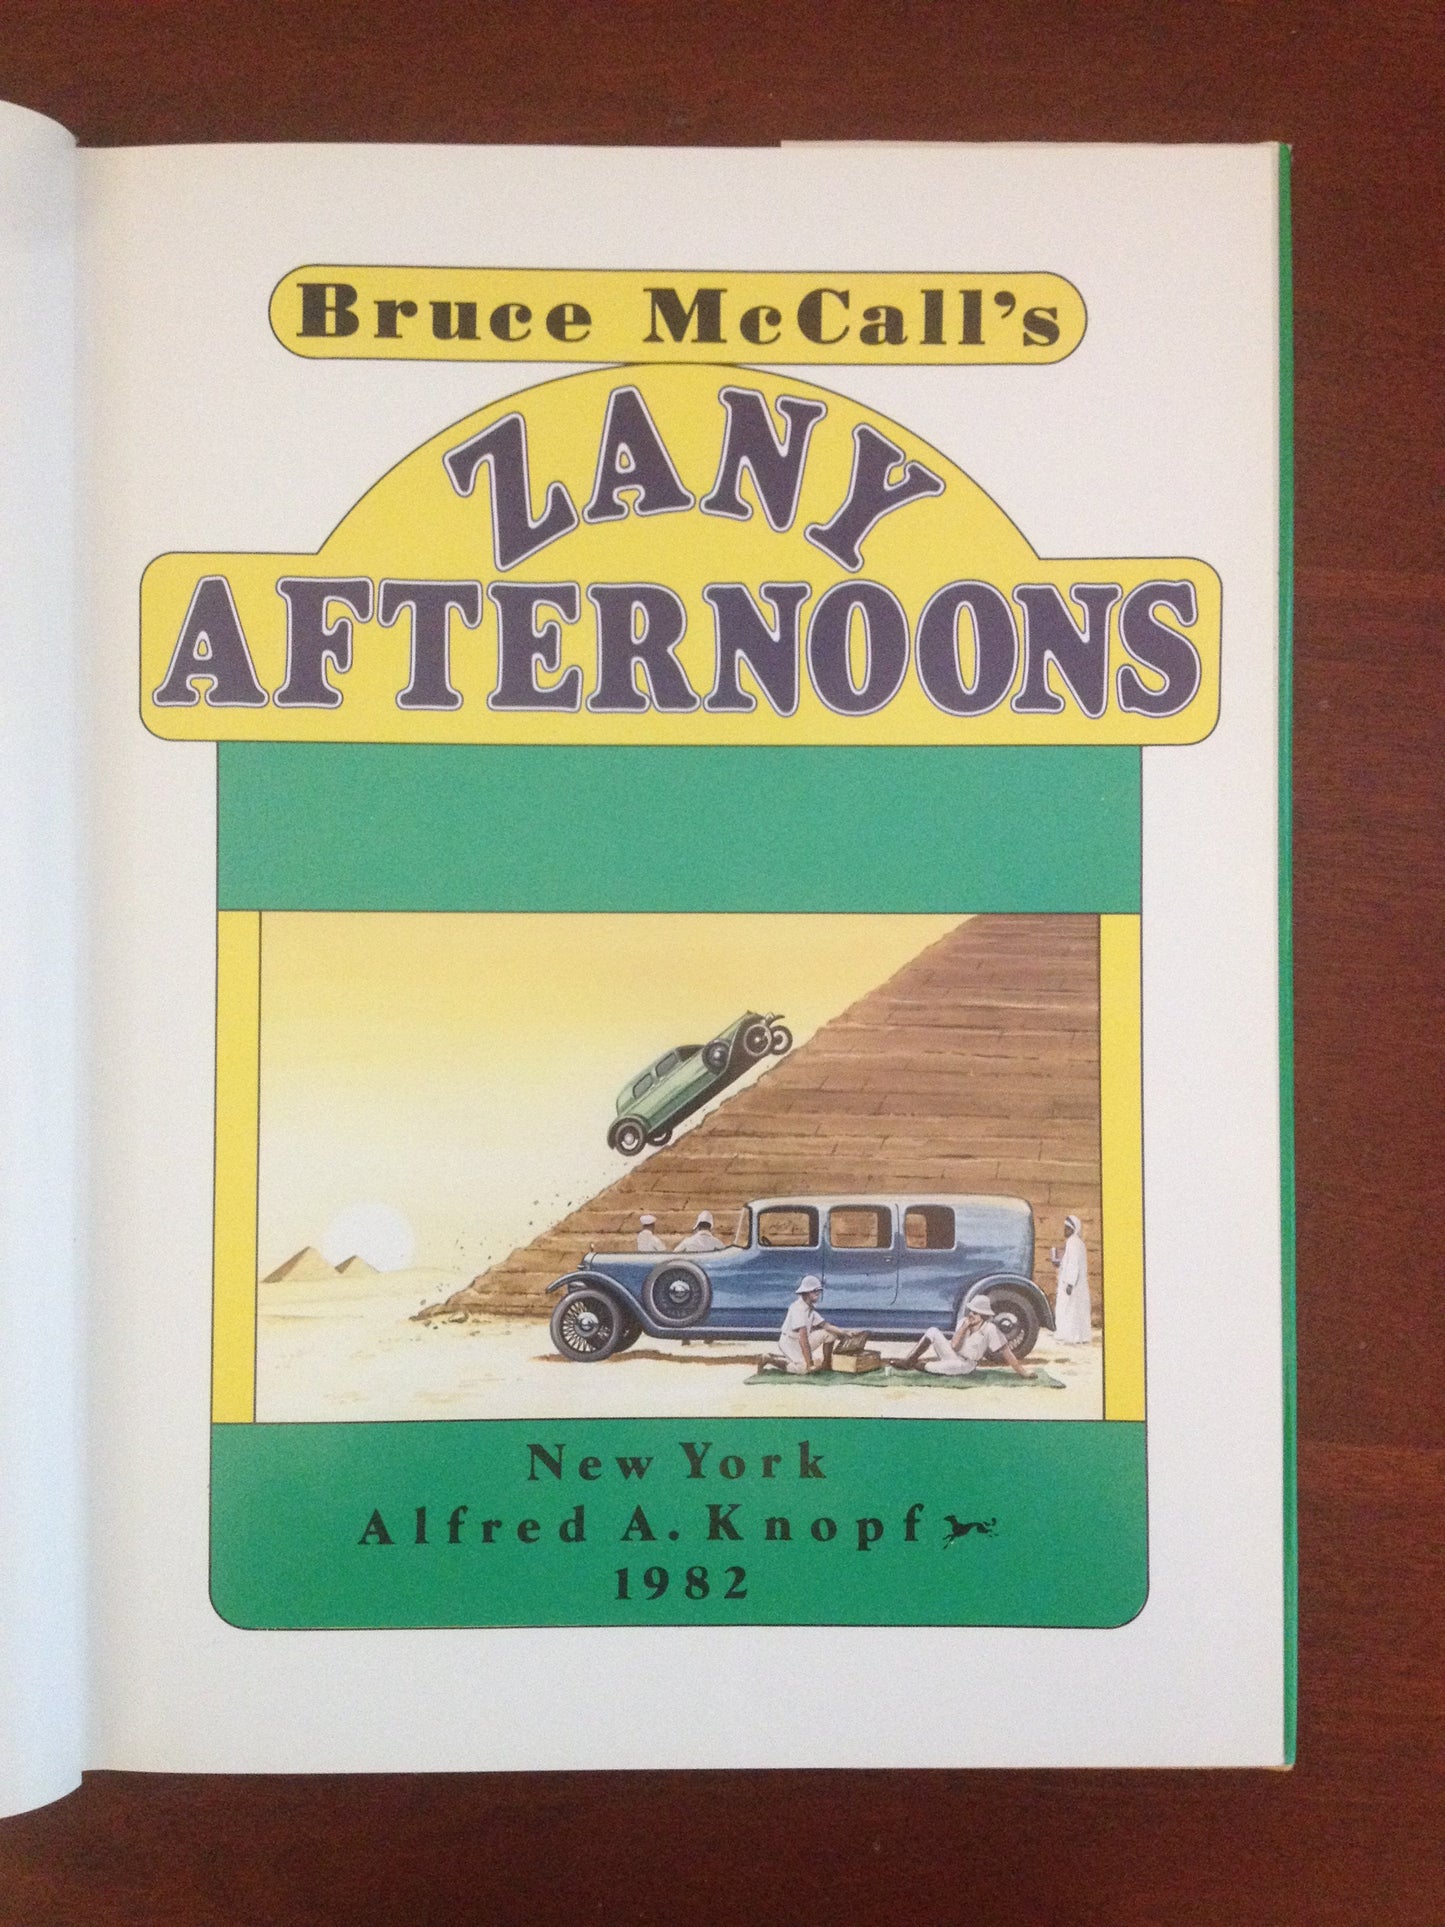 ZANY AFTERNOONS  BY: BRUCE MCCALL BooksCardsNBikes